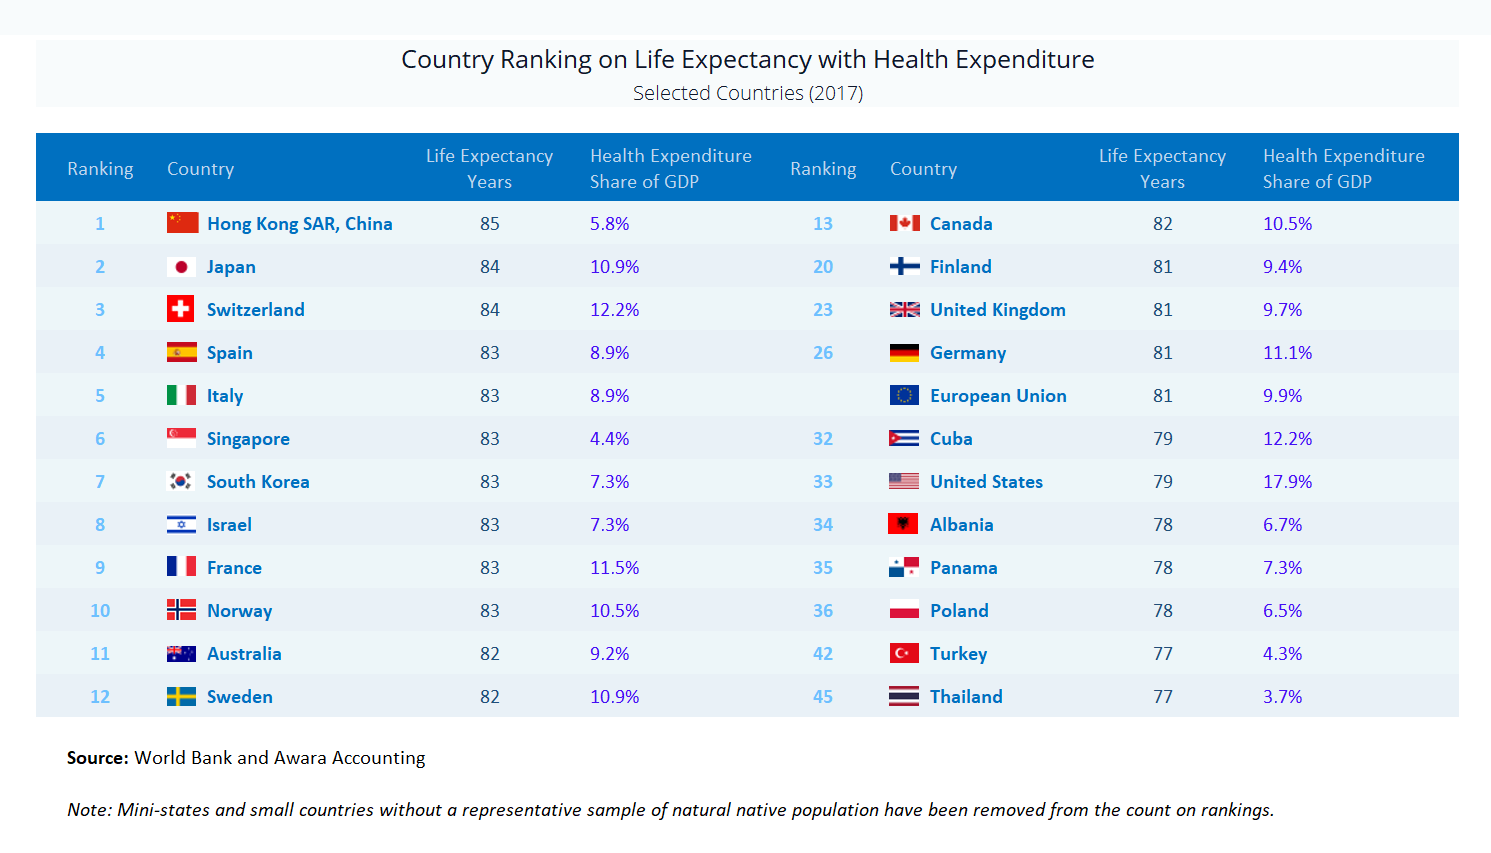 сountries by life expectancy and health expenditure